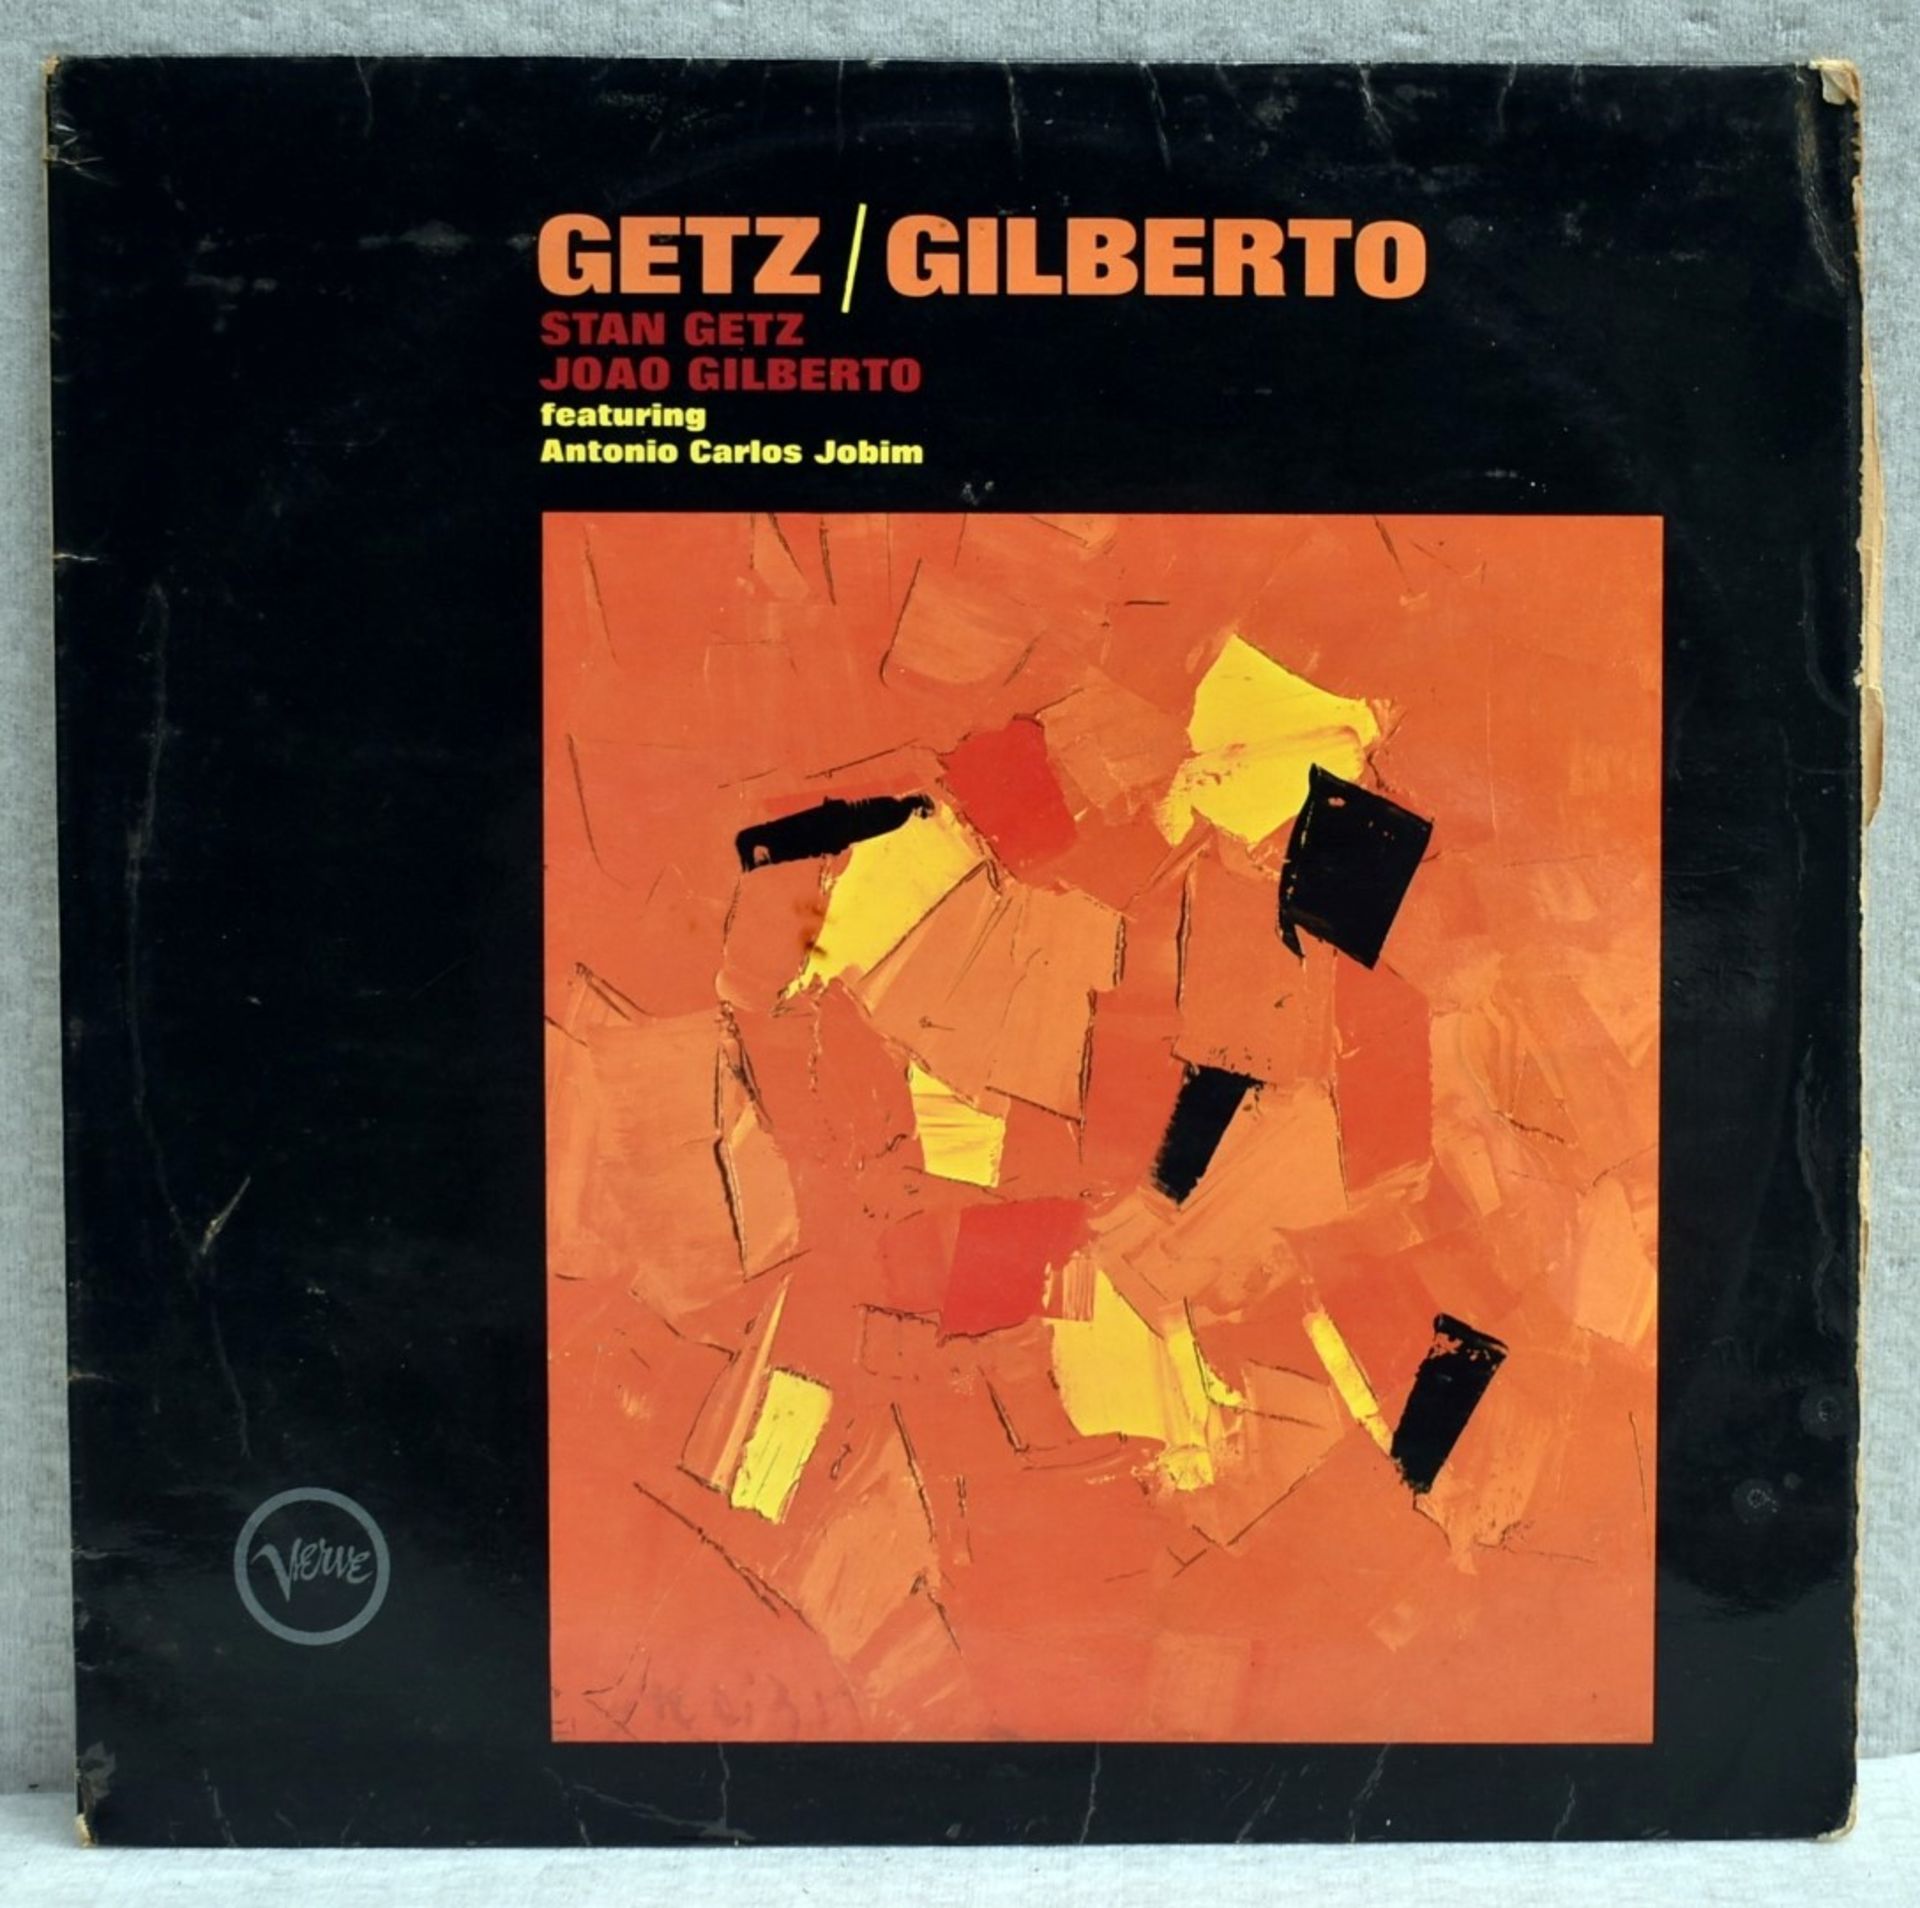 1 x GETZ / GILBERTO by Stan Getz and Joao Gilberto VERVE Records 1964 2 Sided 12 Inch Vynil - Ref: - Image 4 of 15